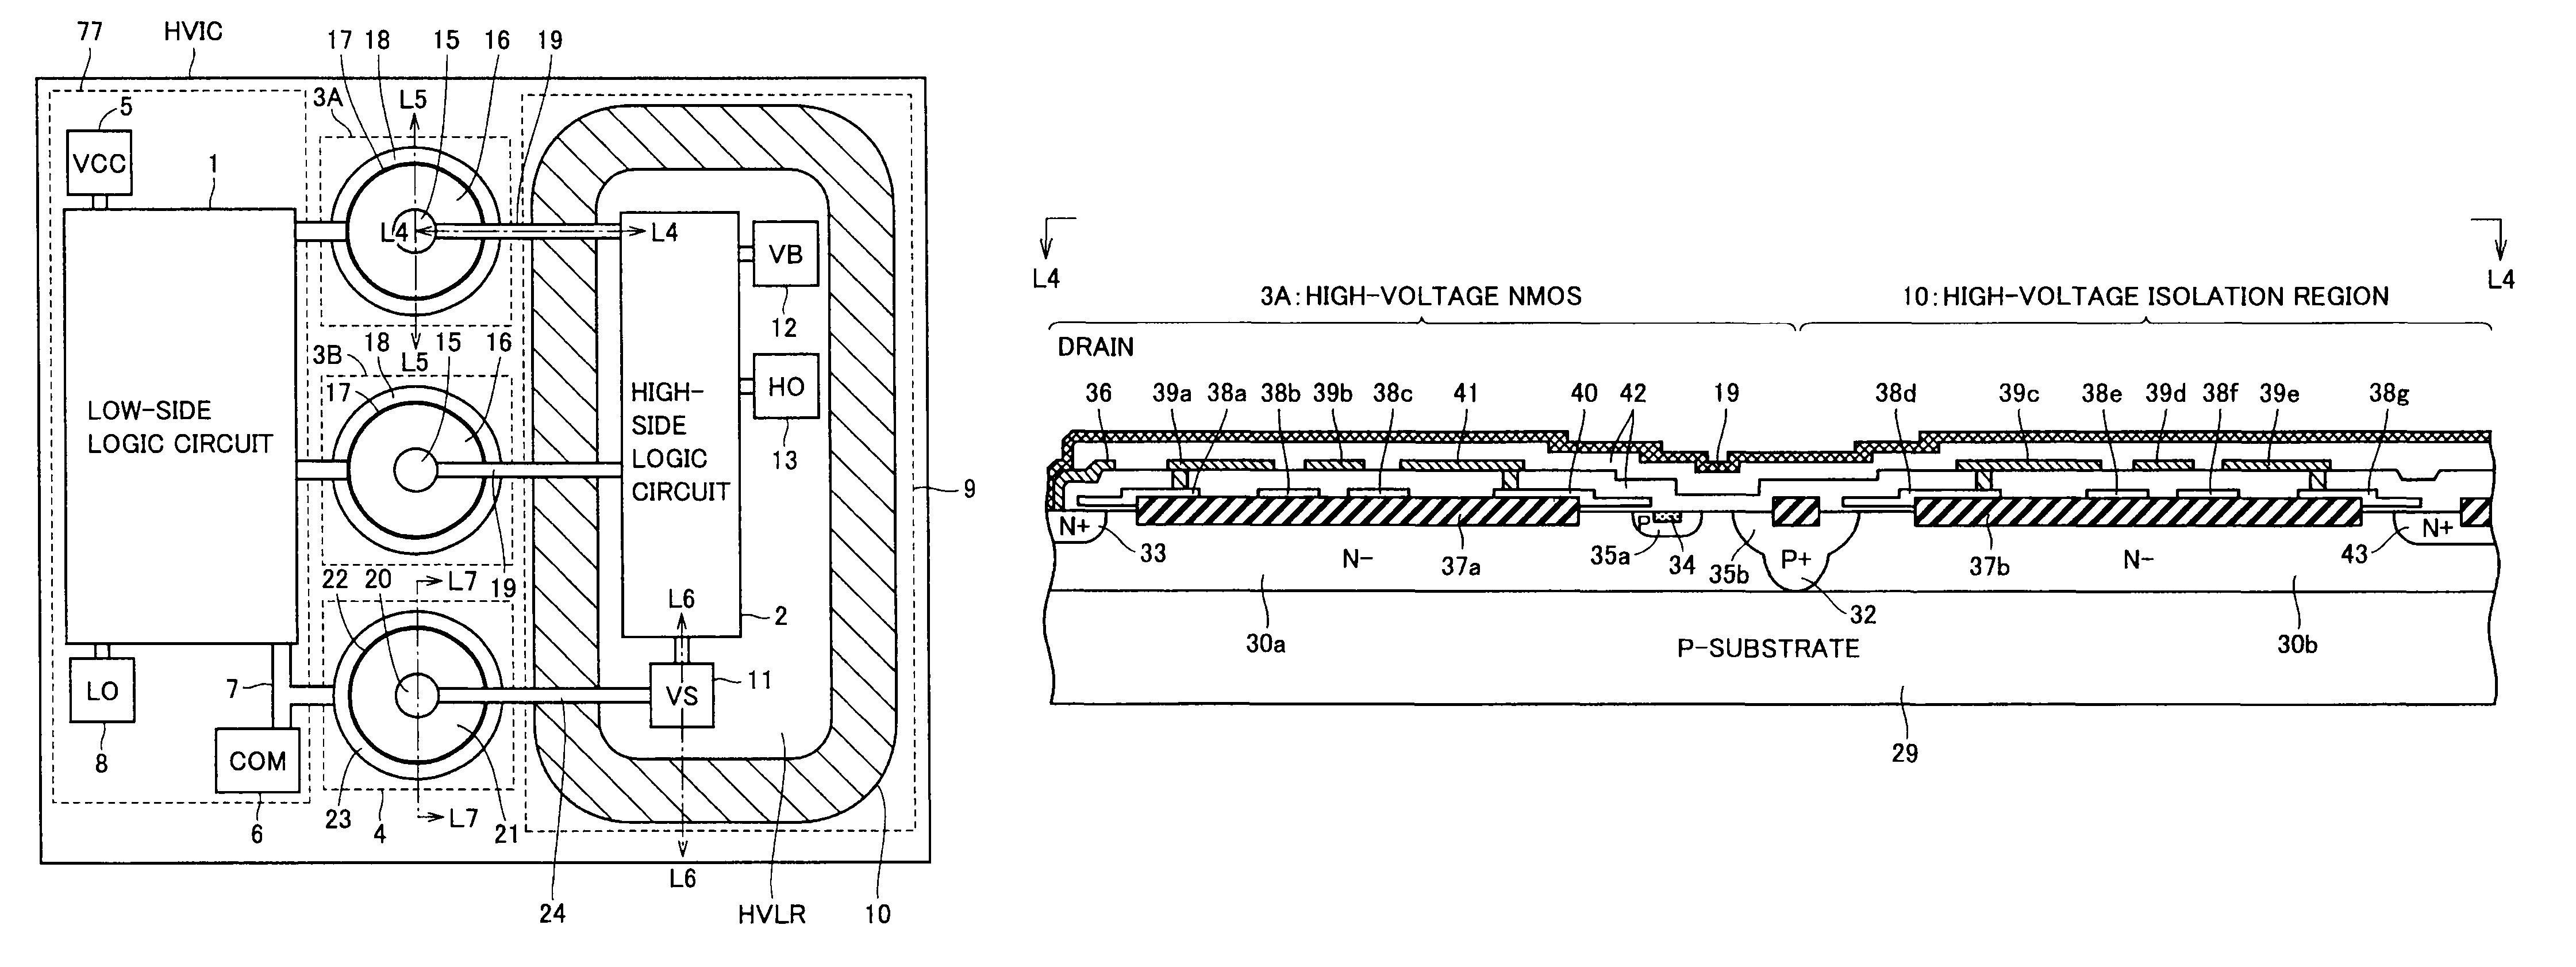 Semiconductor device driving bridge-connected power transistor